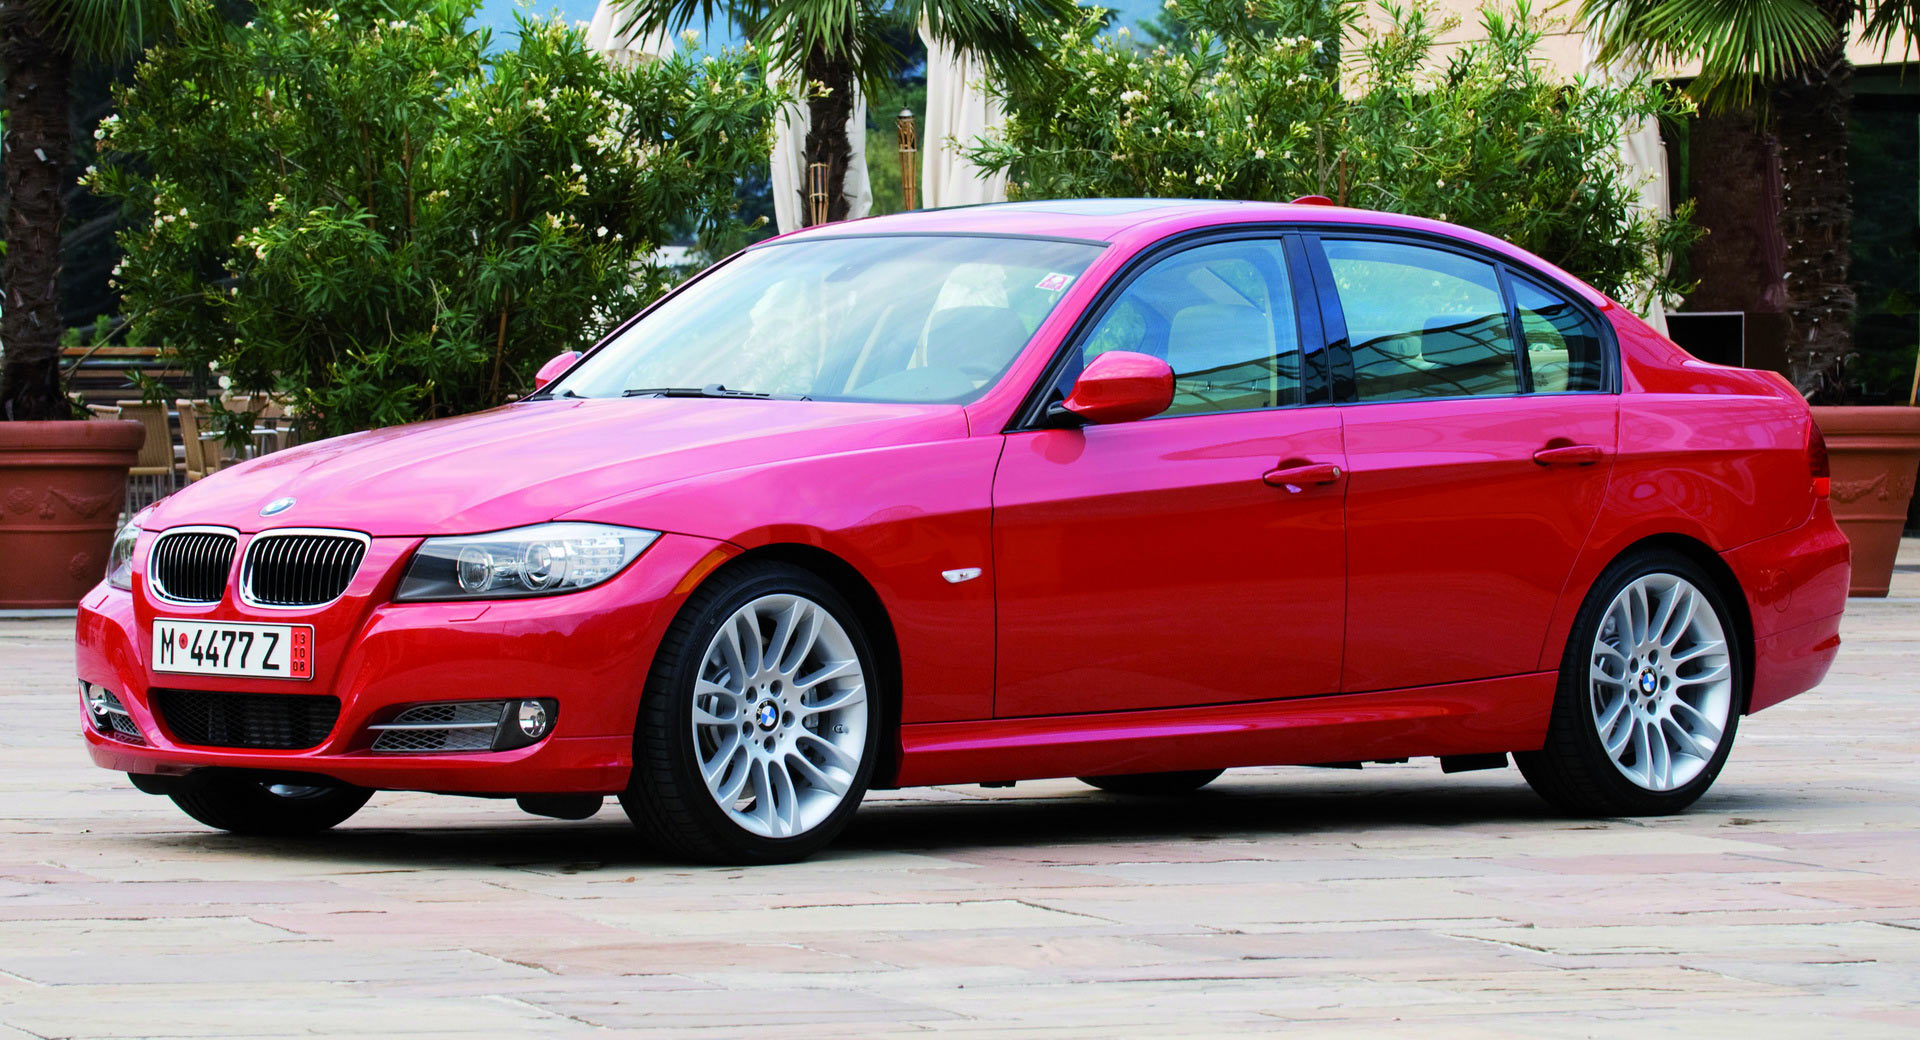 Top 5 Most Special BMW 3-Series Models That Are Not M3s